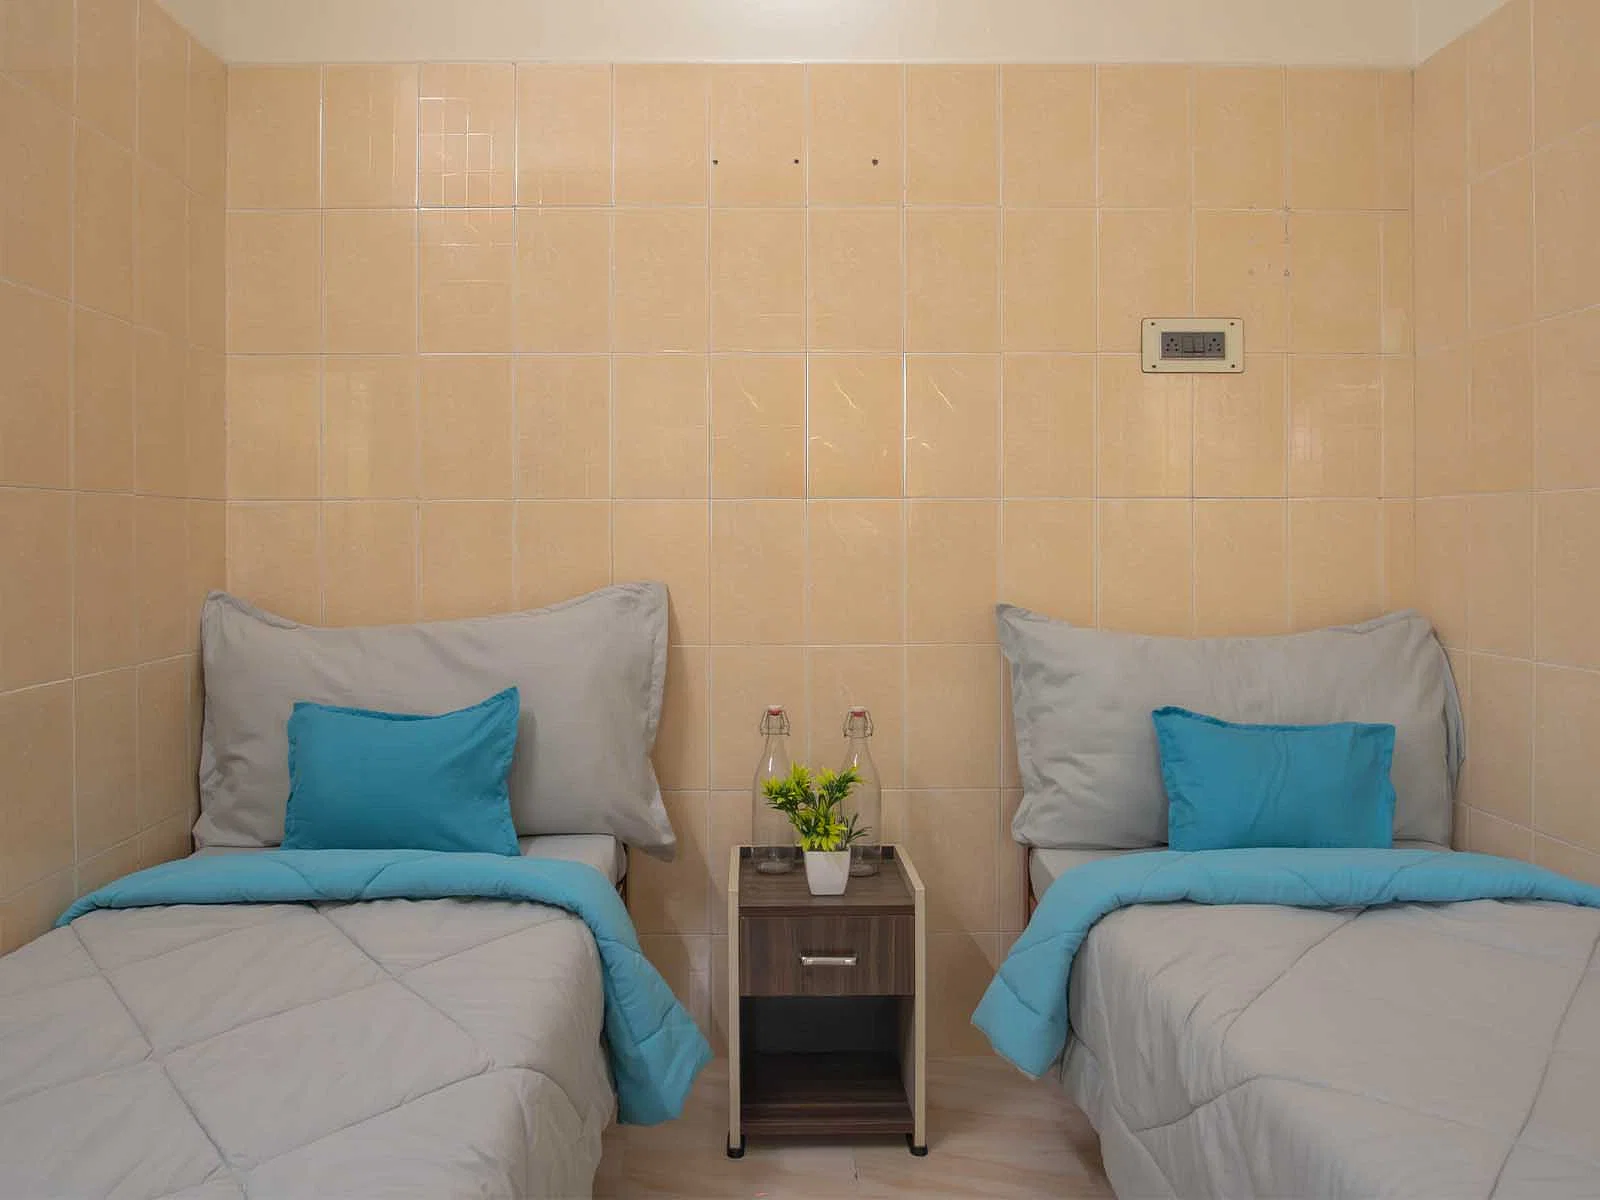 fully furnished Zolo single rooms for rent near me-check out now-Zolo Gem